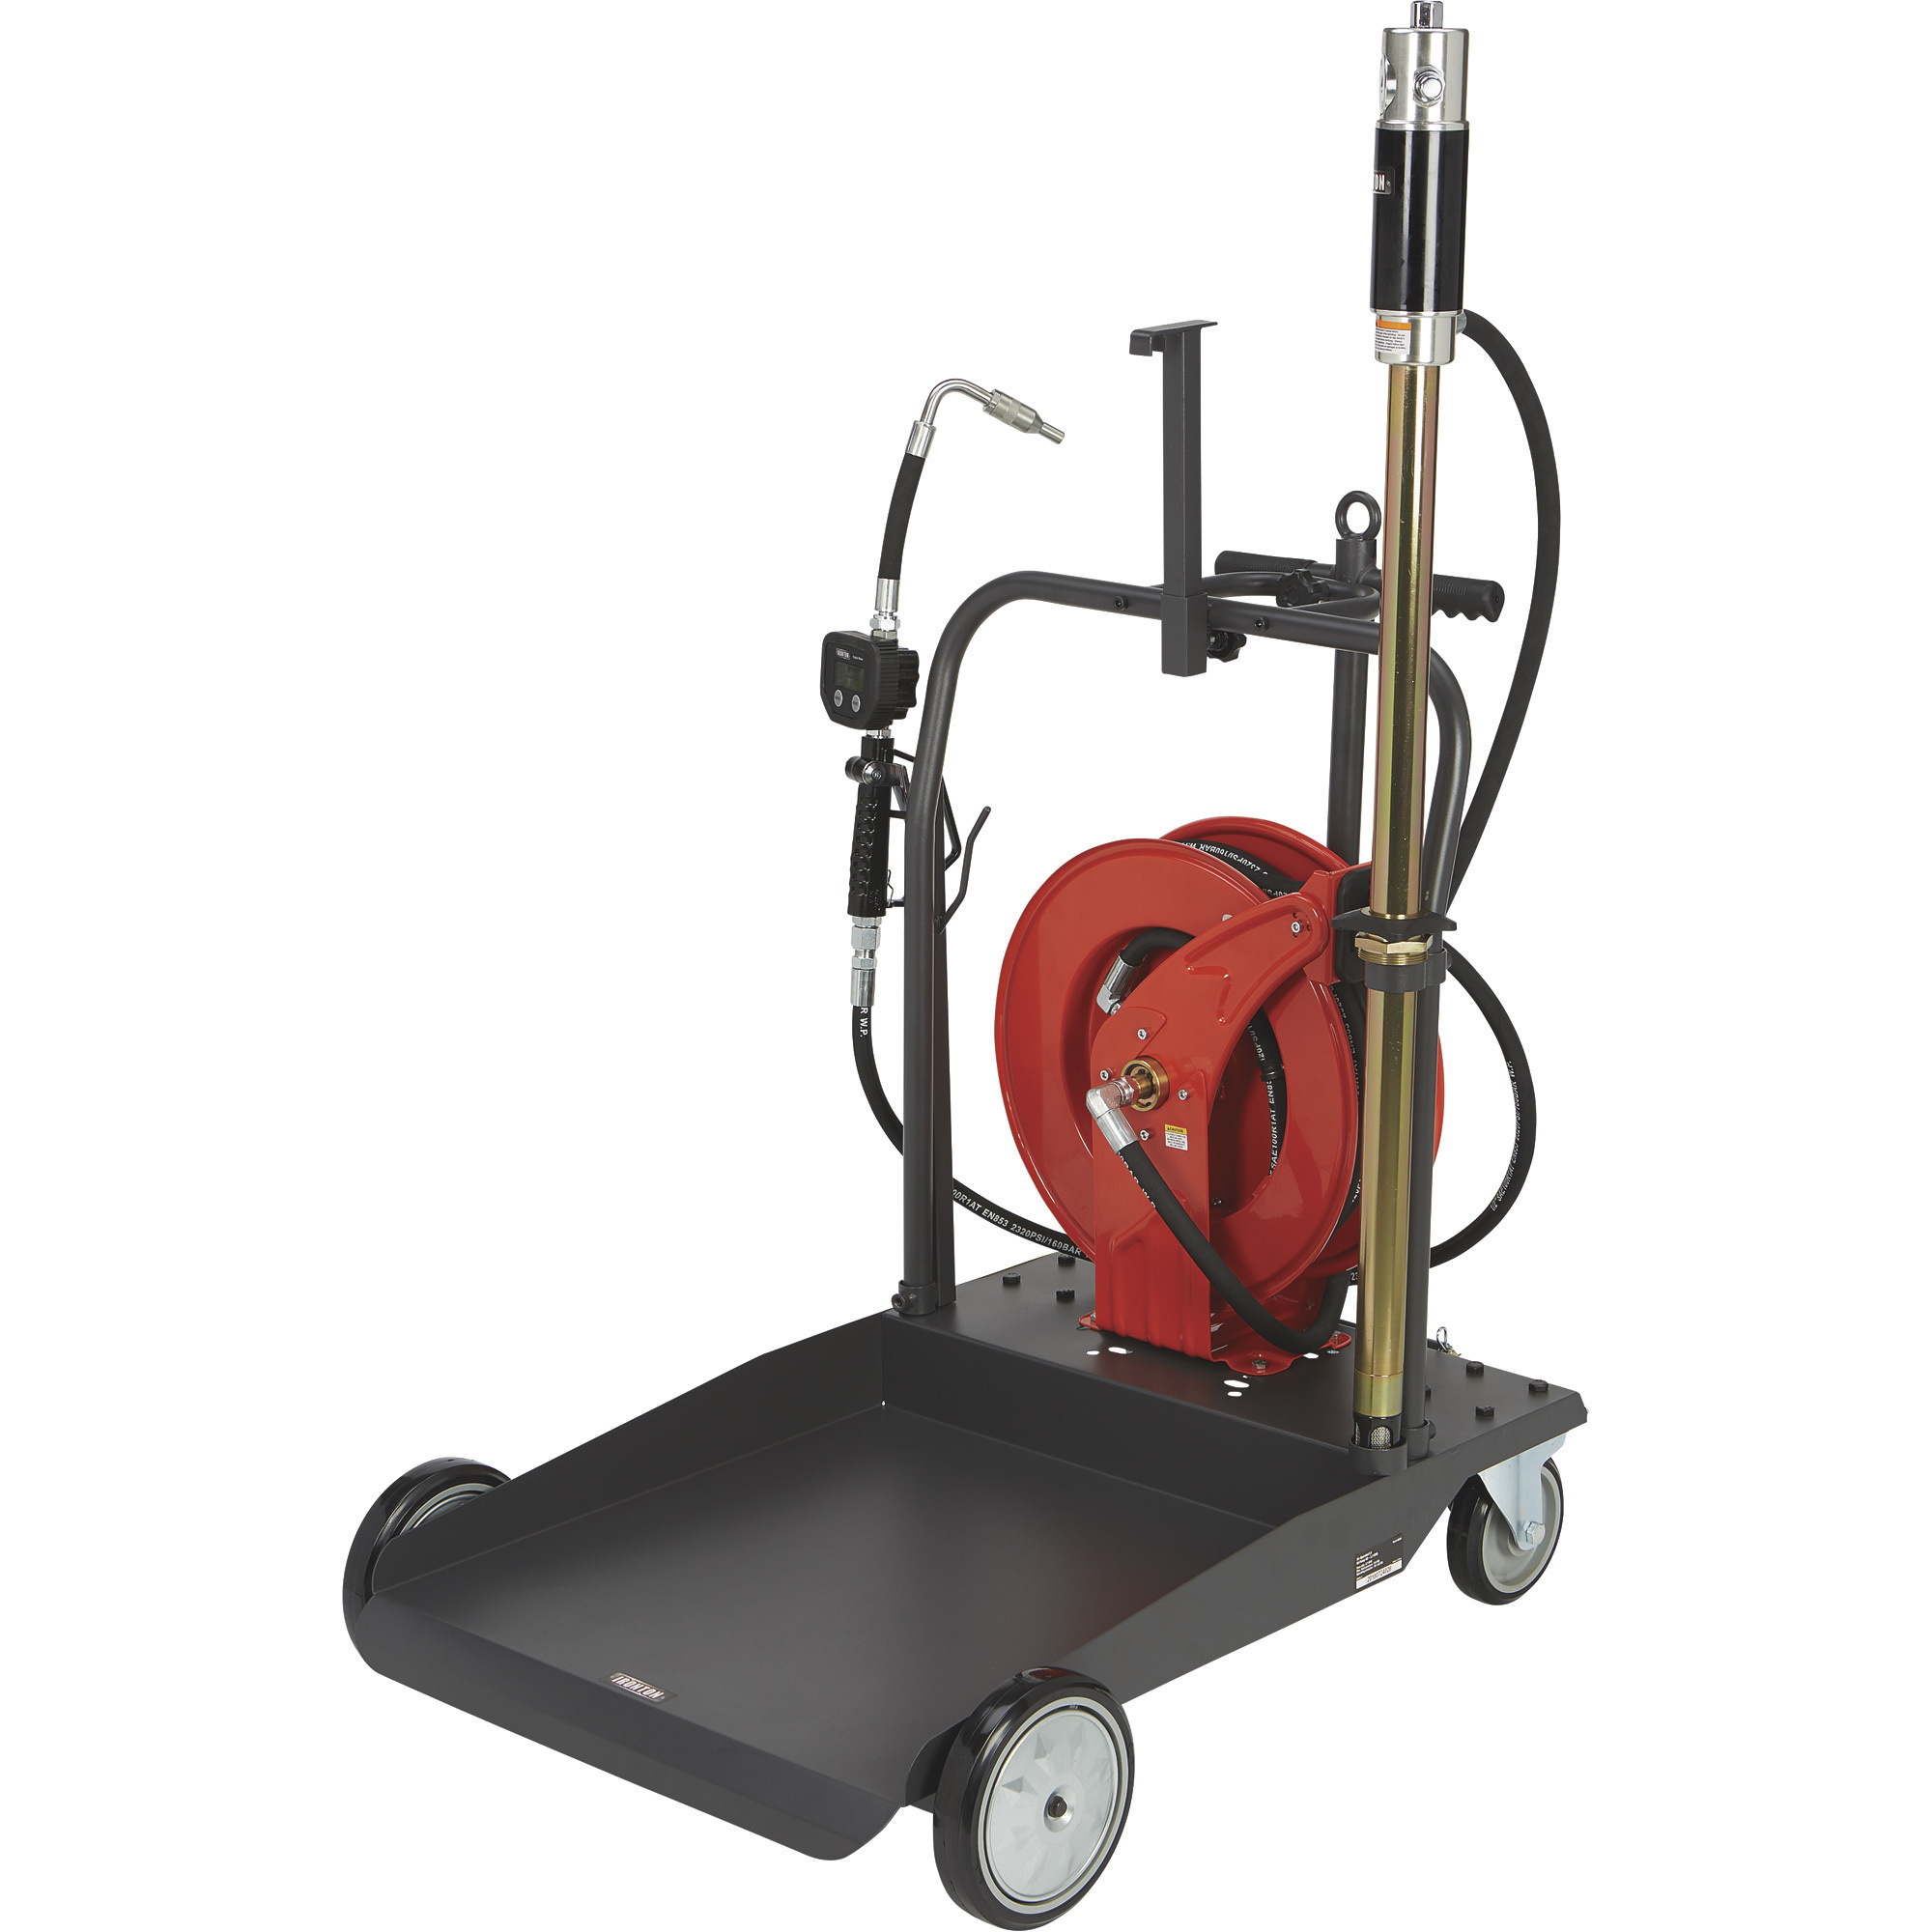 Ironton Air-Operated 5:1 Oil Pump Kit, With Cart and Hose Reel, 3.7 GPM